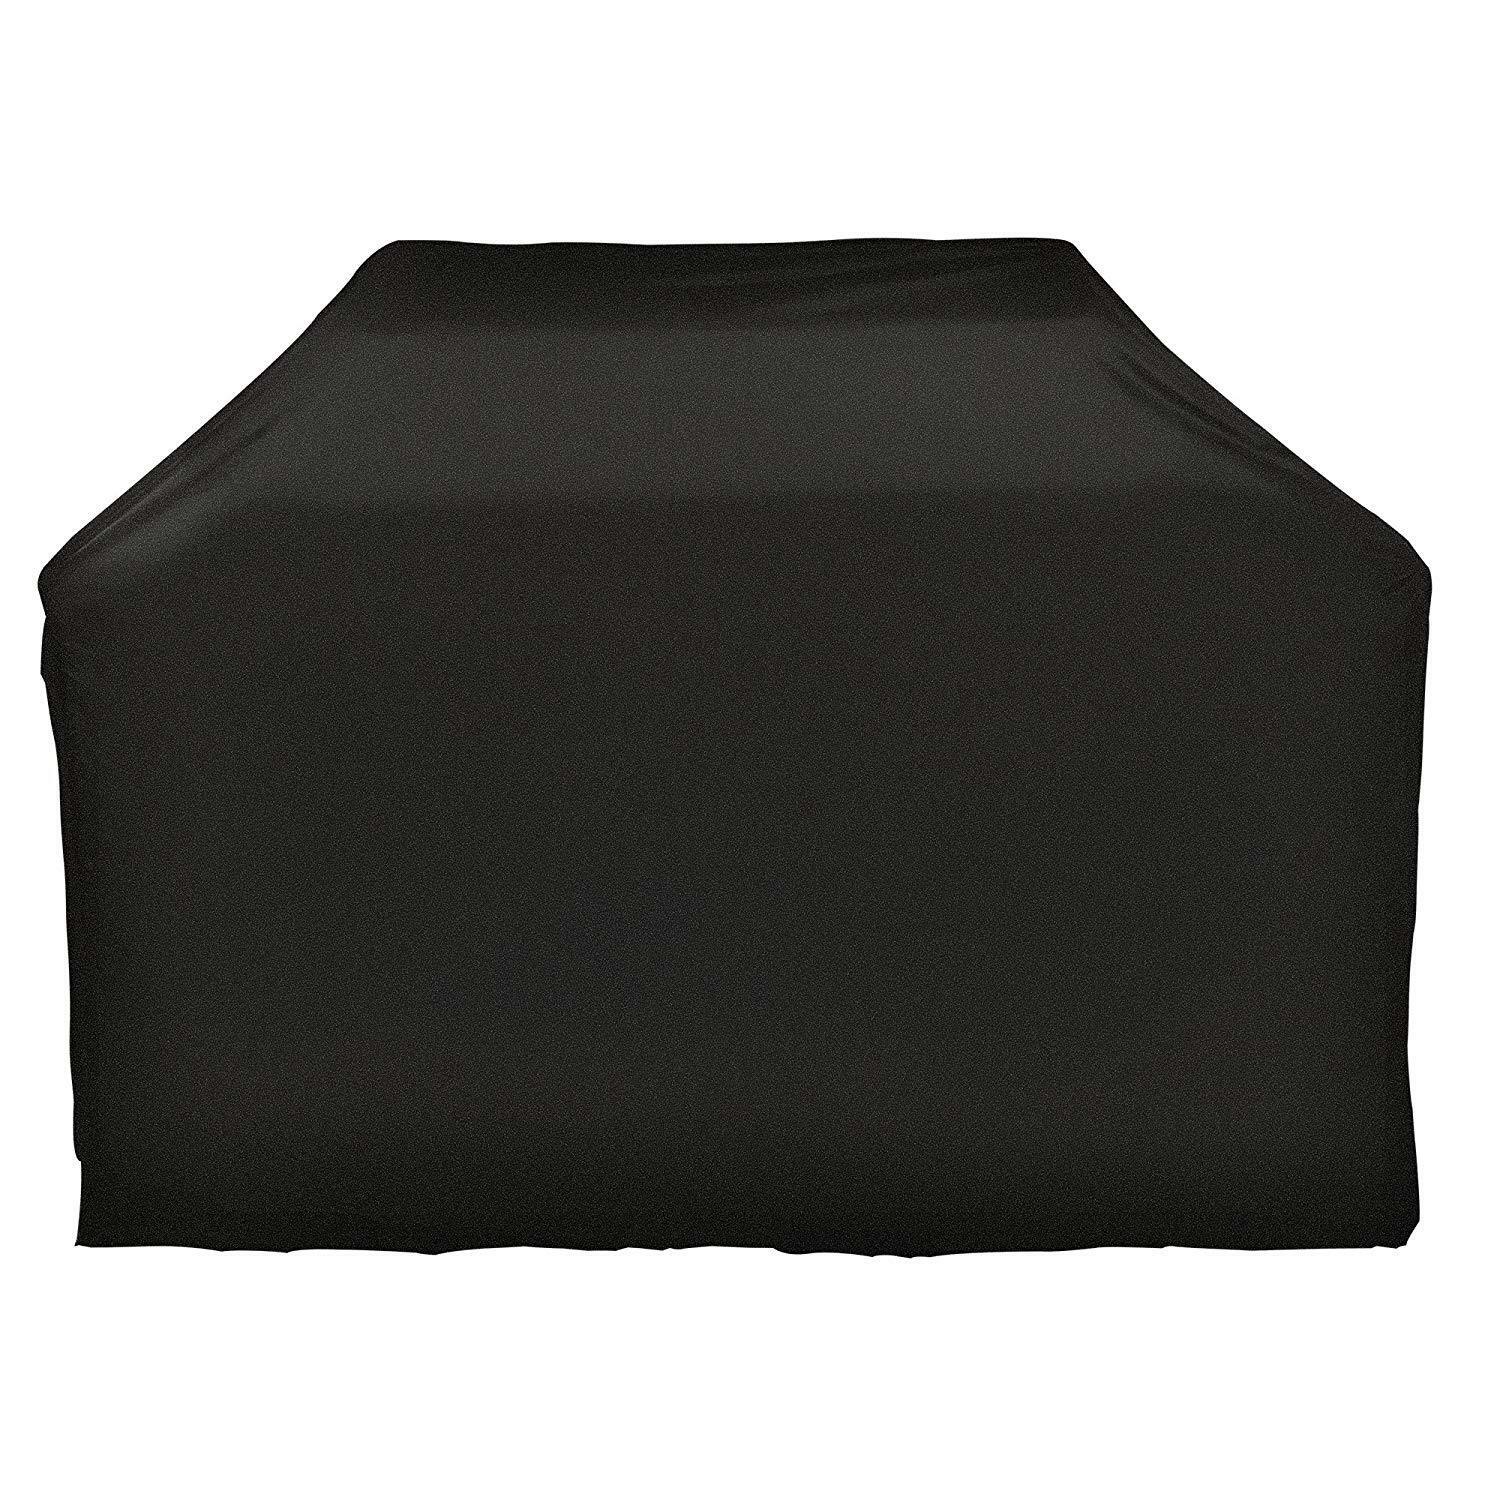 Icover Grill Cover-65 Inch For Weber Char-broil Brinkmann Holland Jennair